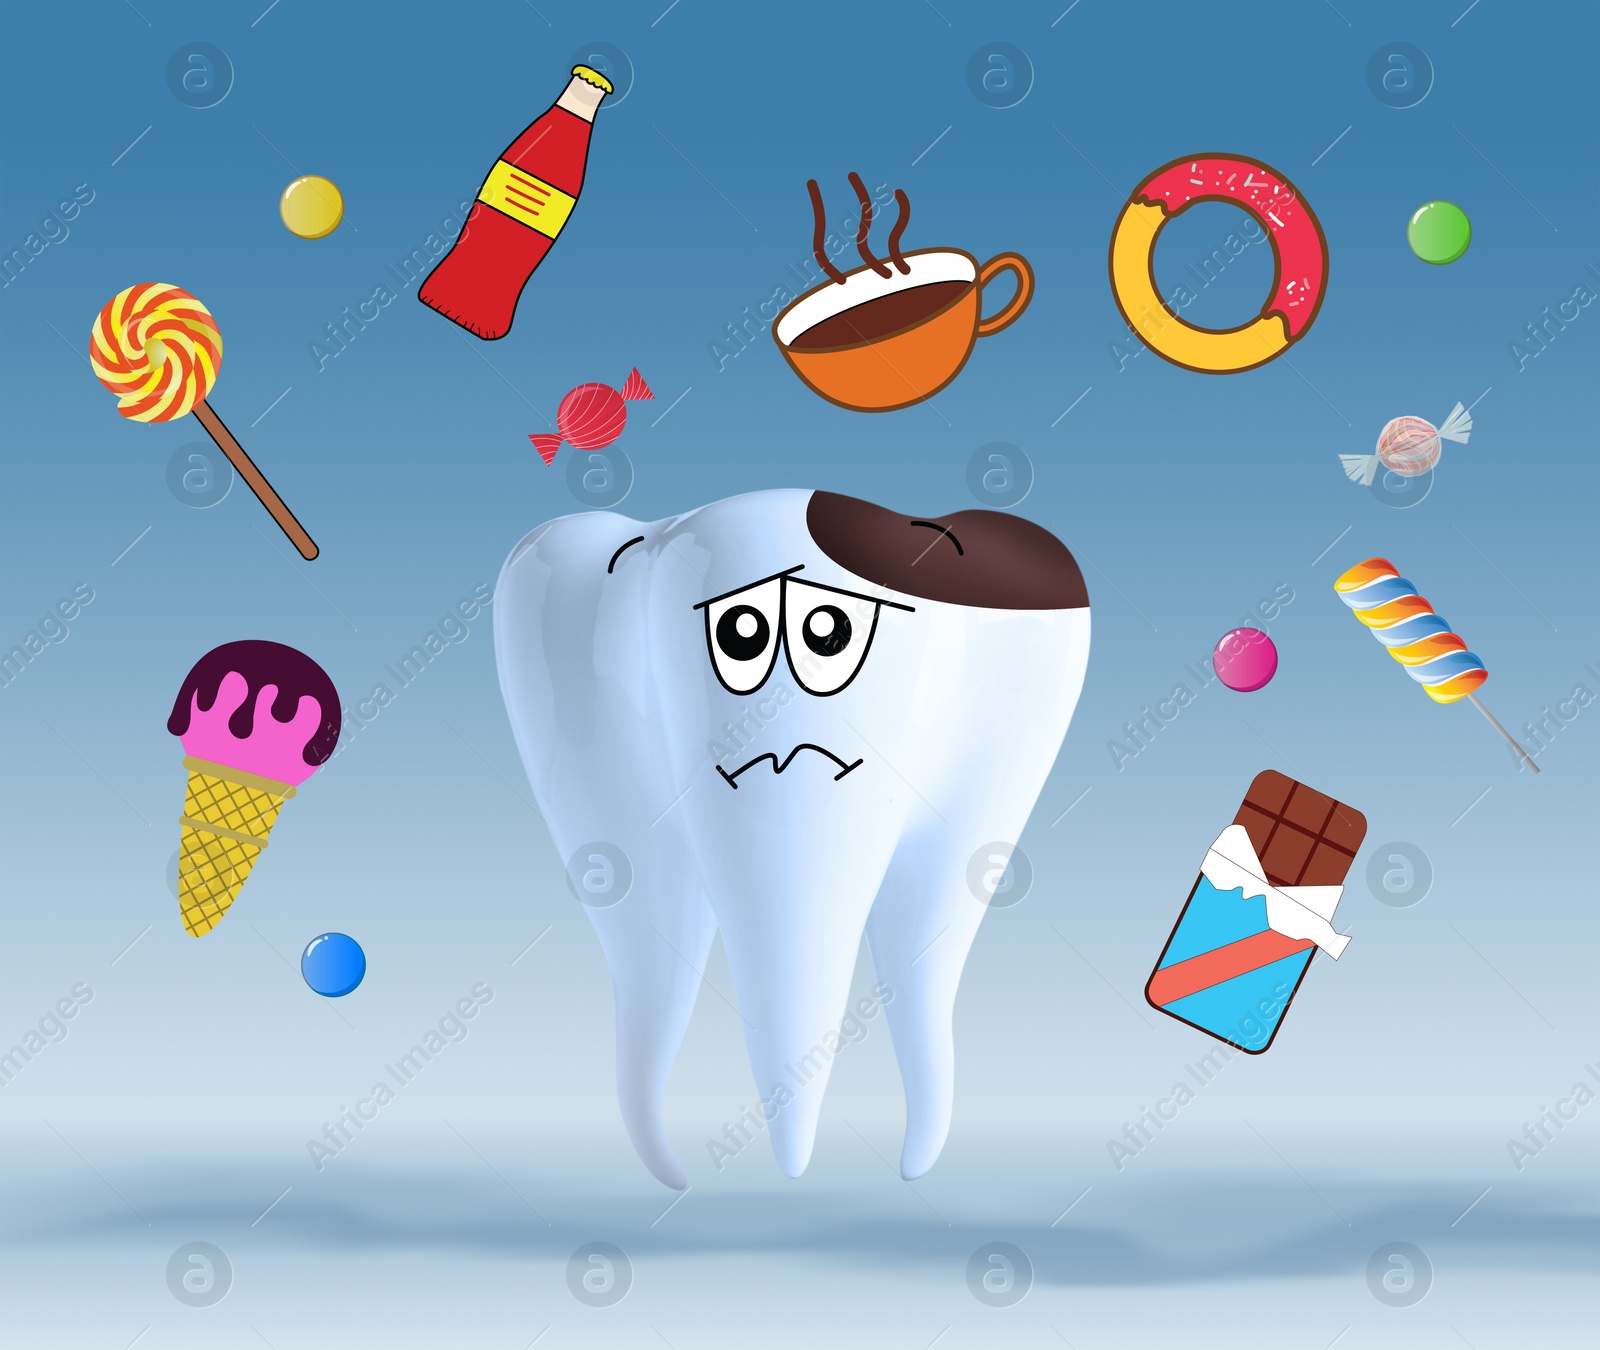 Illustration of Unhealthy tooth and harmful products on light blue background, illustration. Dental problem